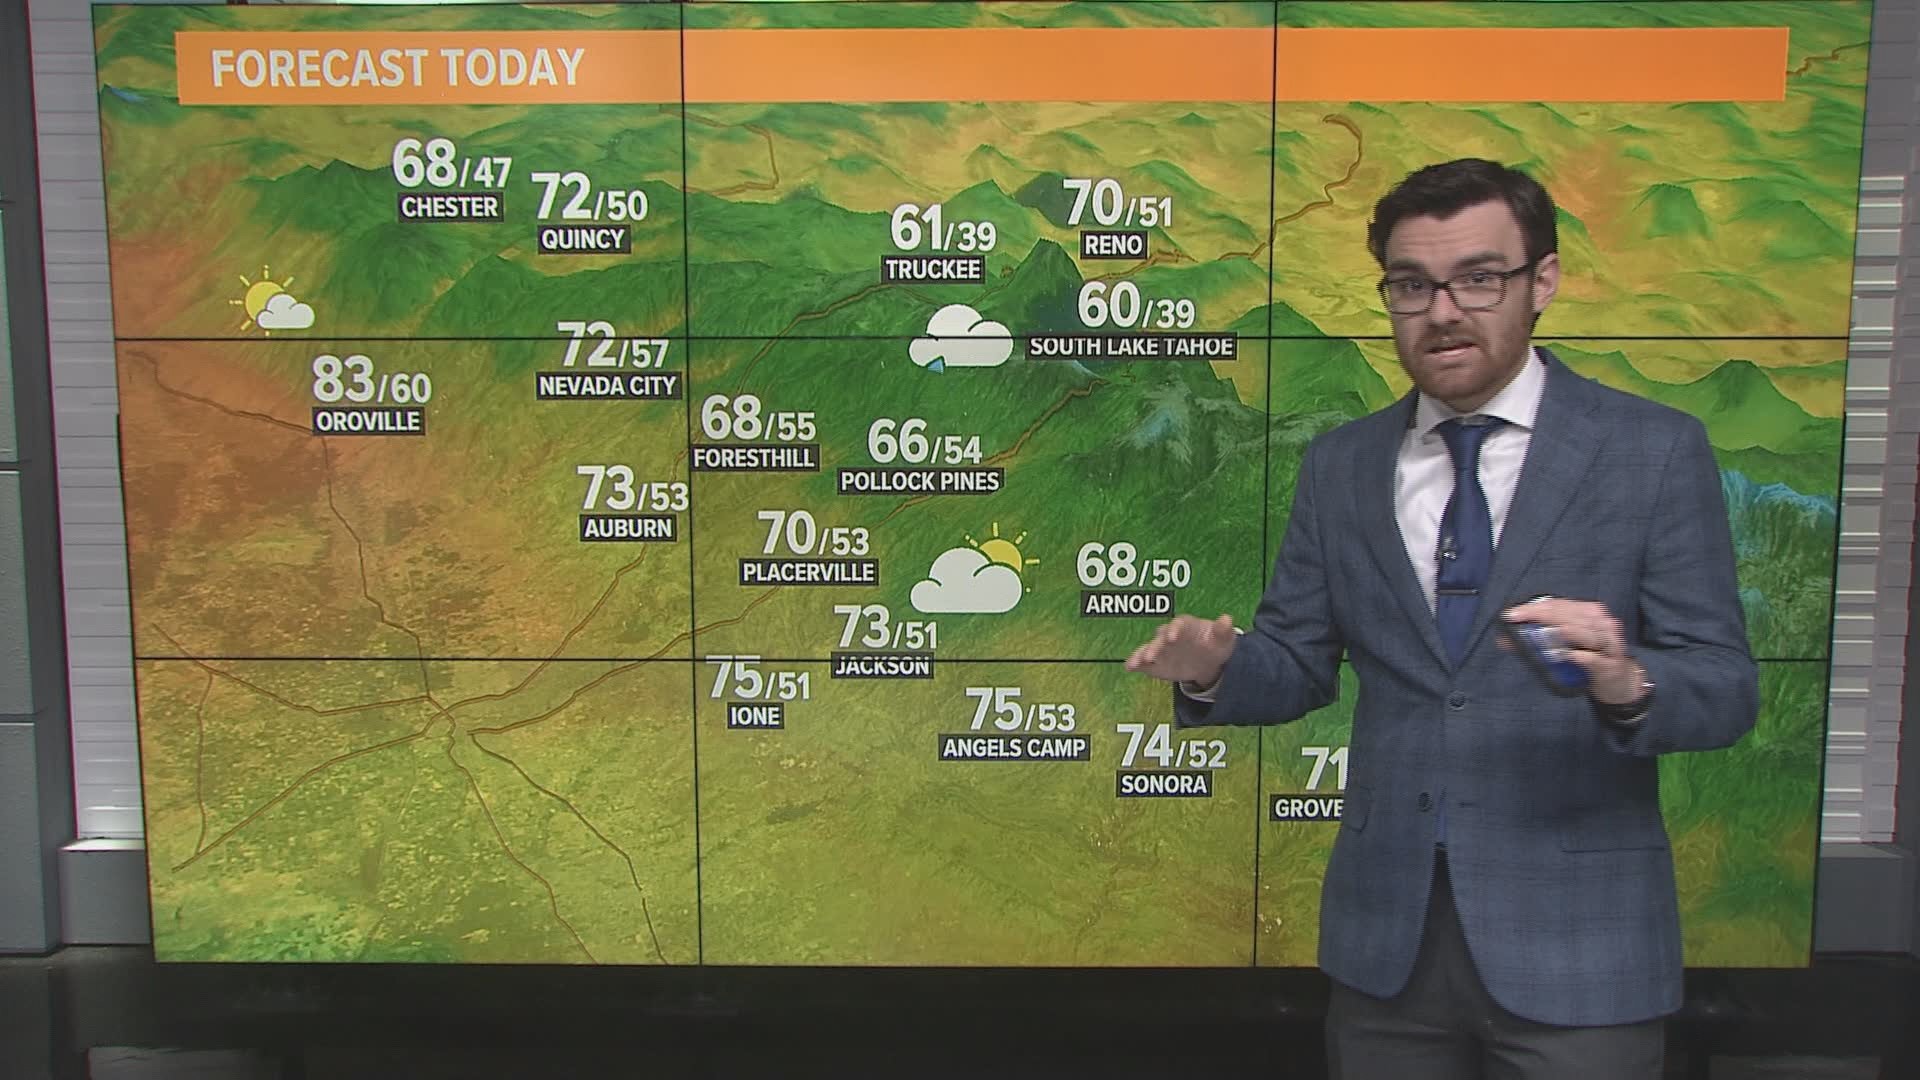 ABC10 meteorologist Brenden Mincheff has the latest weather forecast for Northern California for Sunday, May 28th.